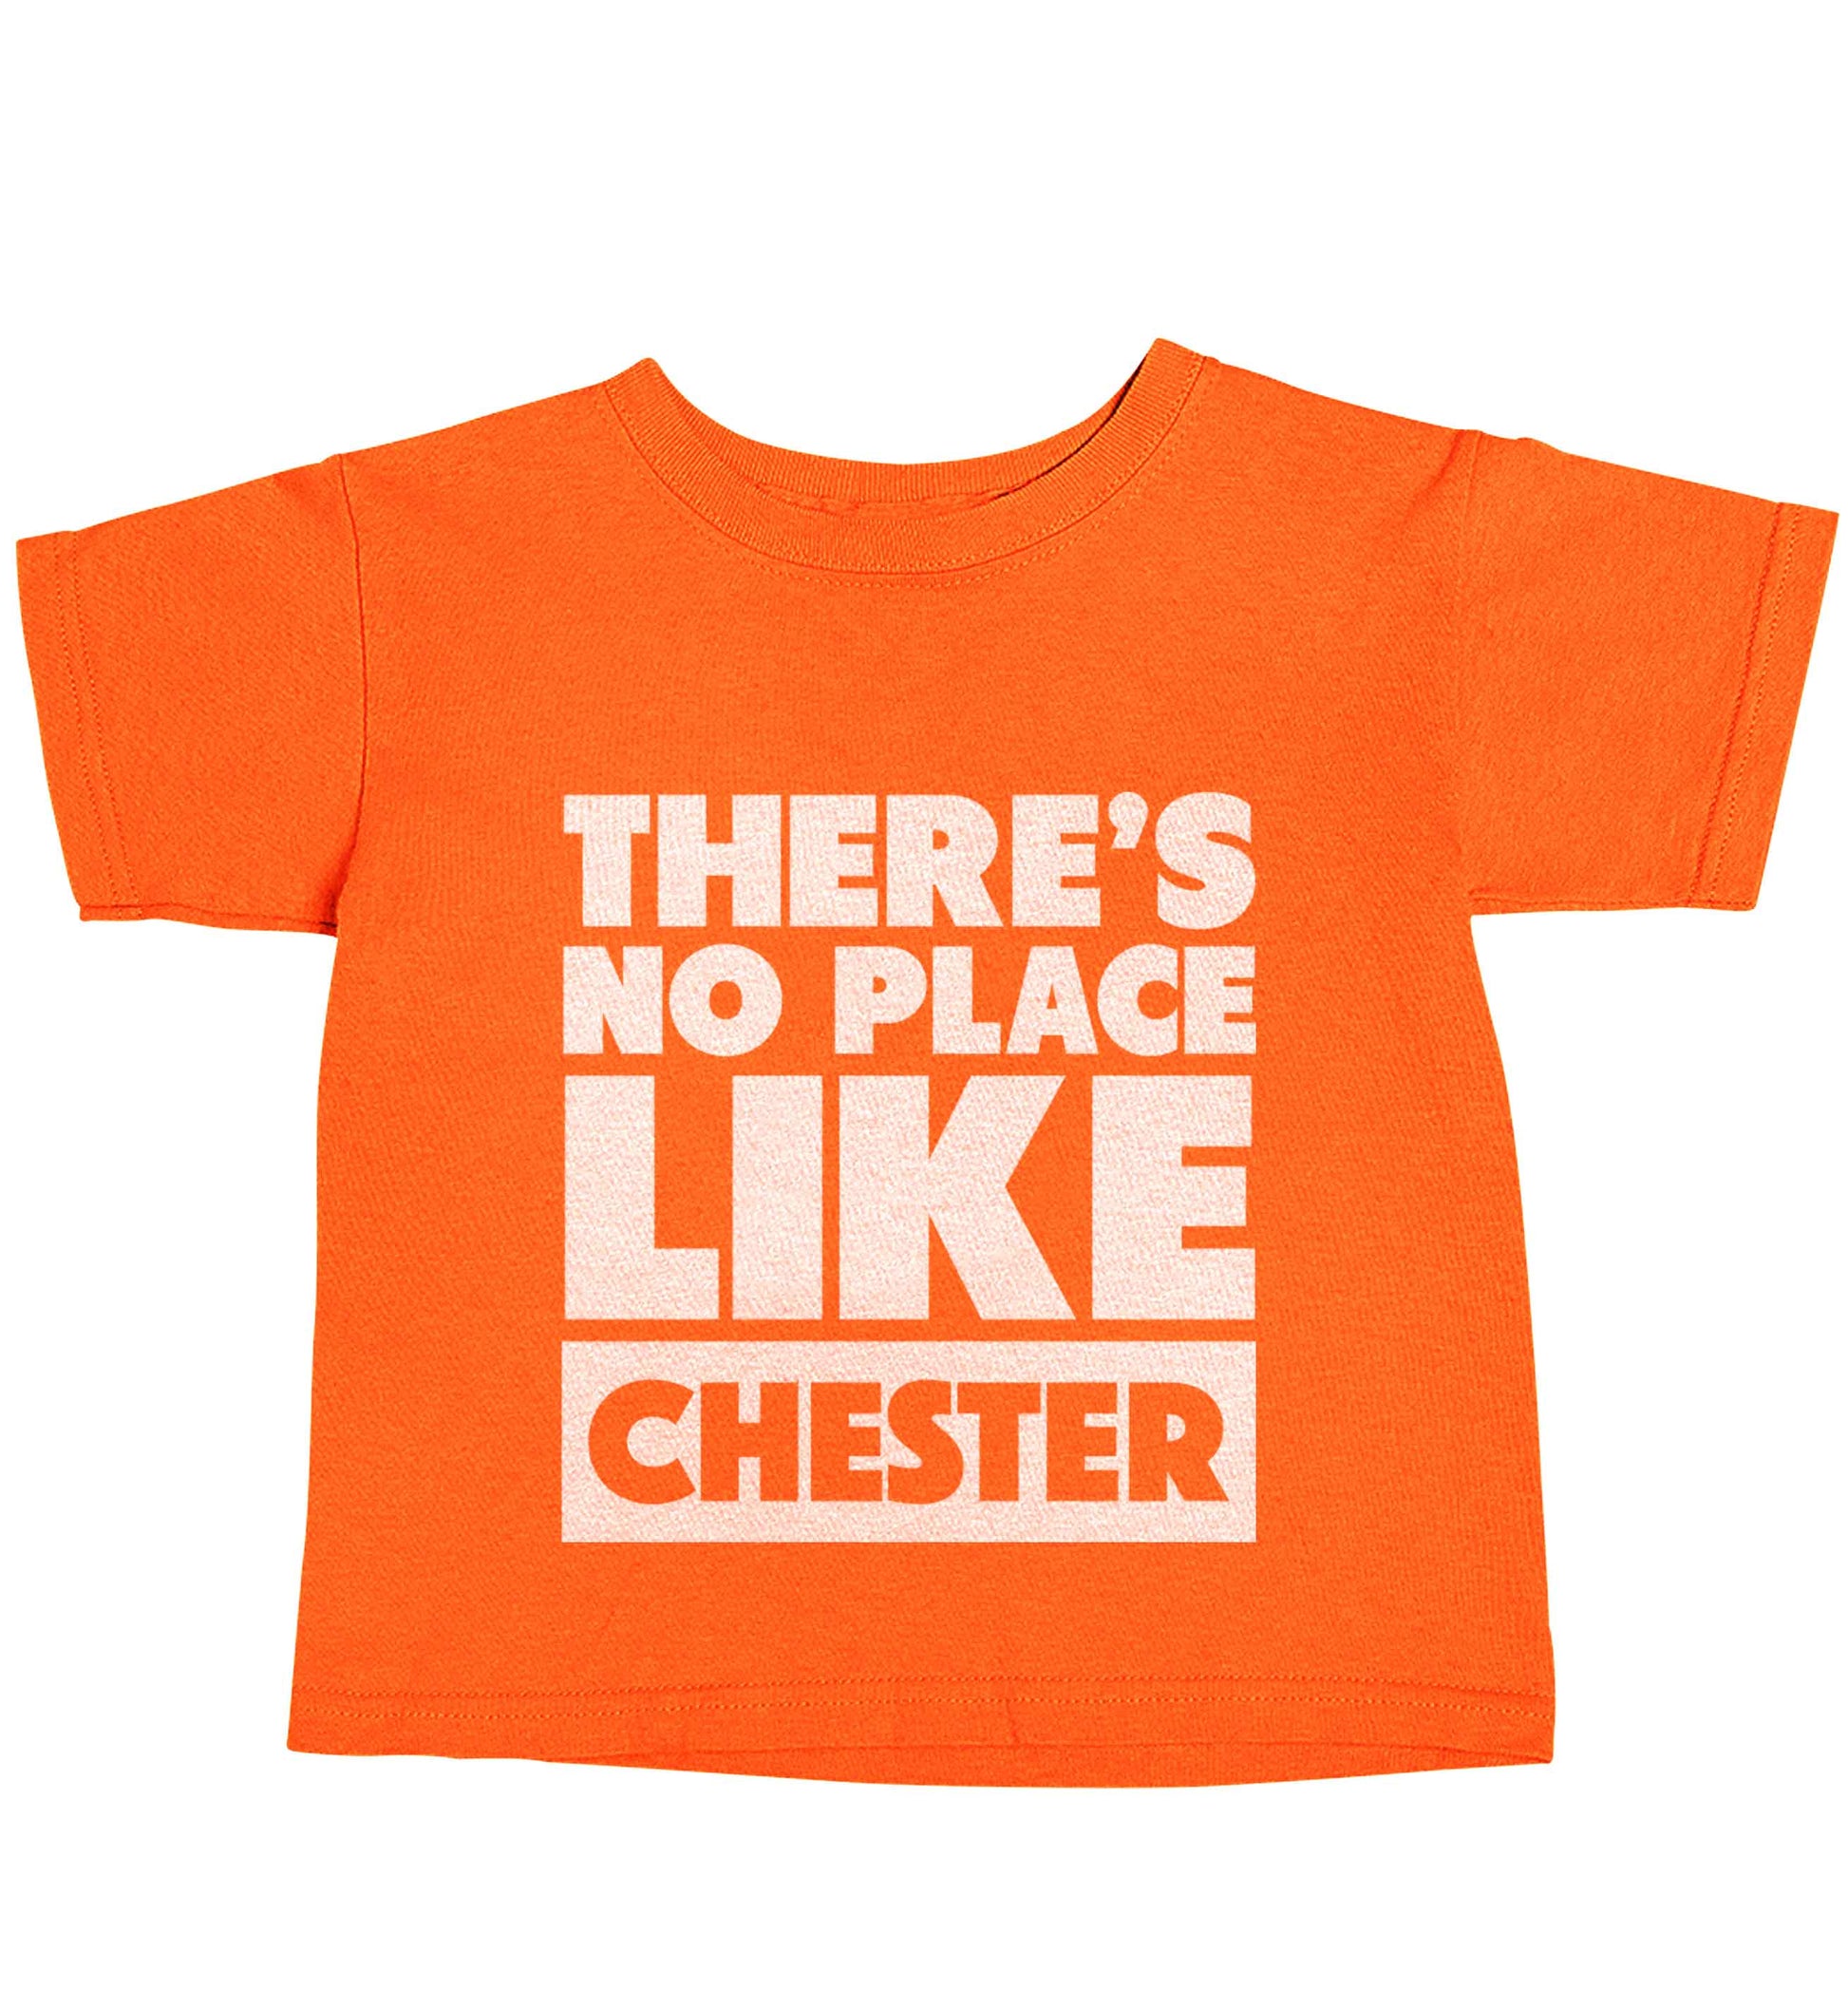 There's no place like Chester orange baby toddler Tshirt 2 Years